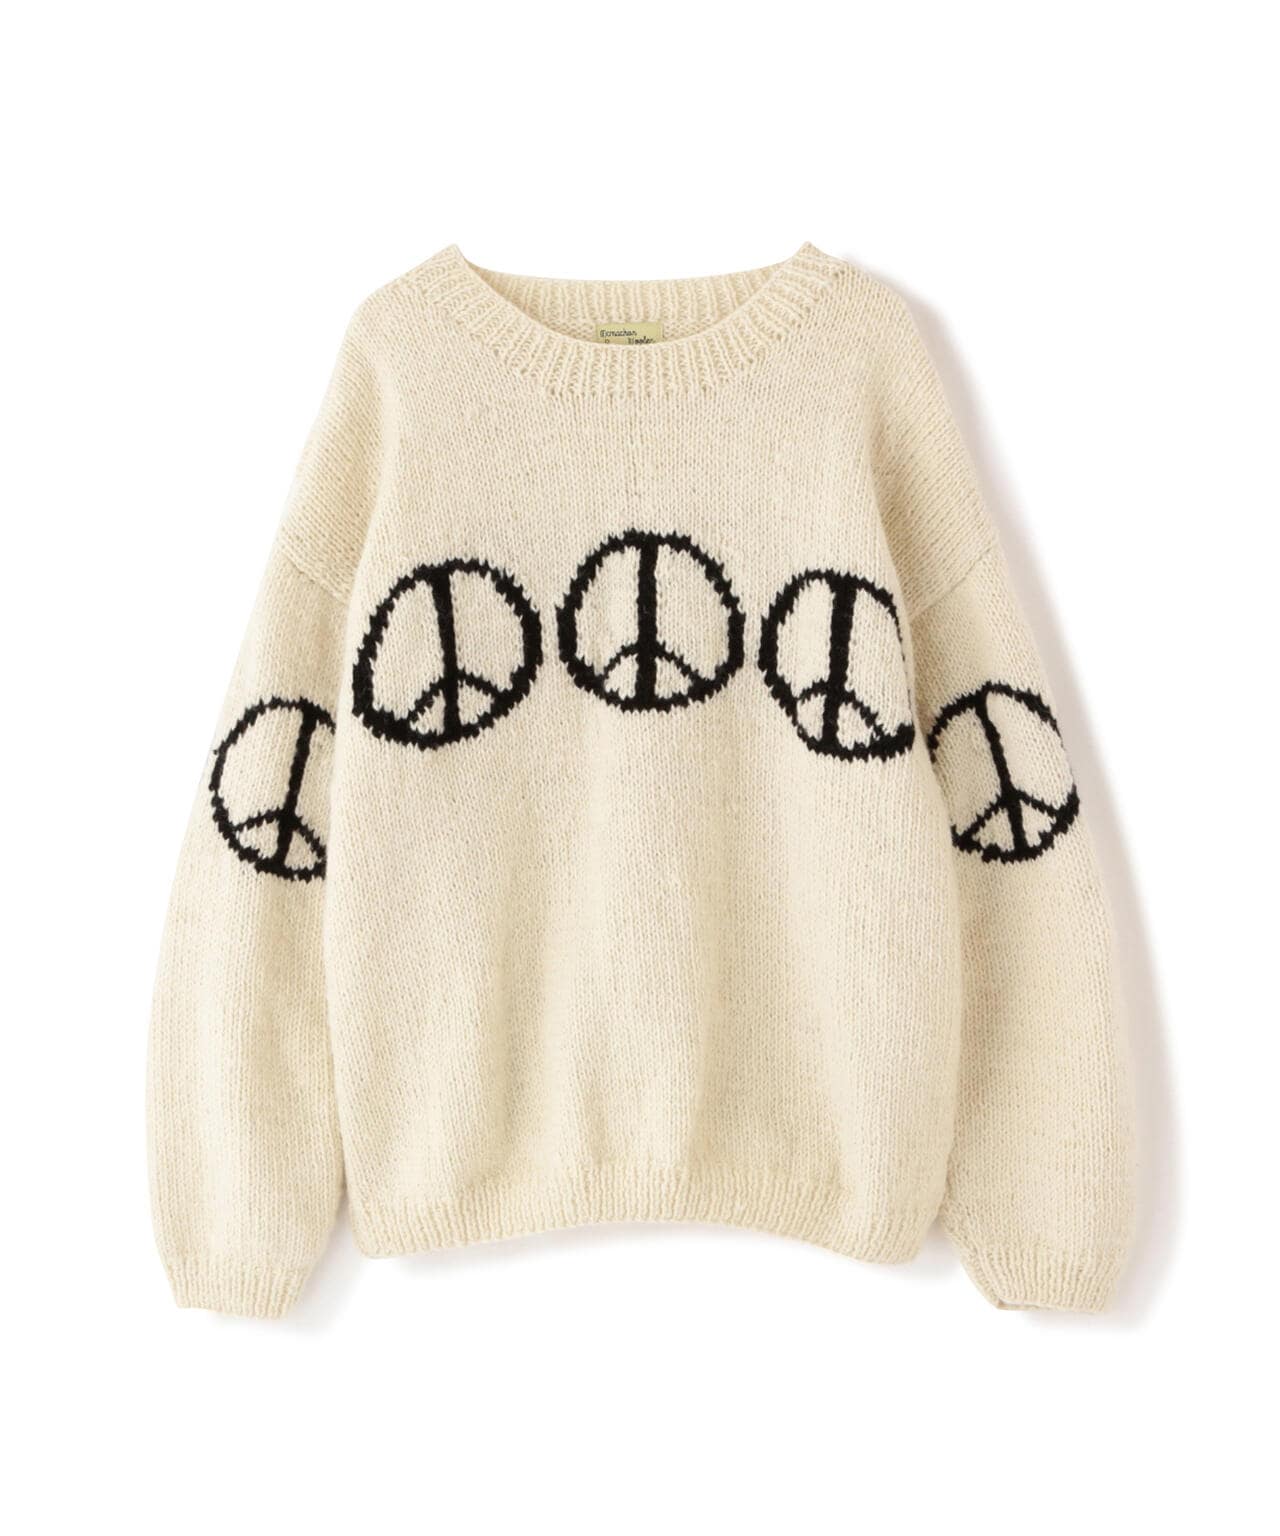 MacMahon Knitting Mills Line Peace Knit | eclipseseal.com